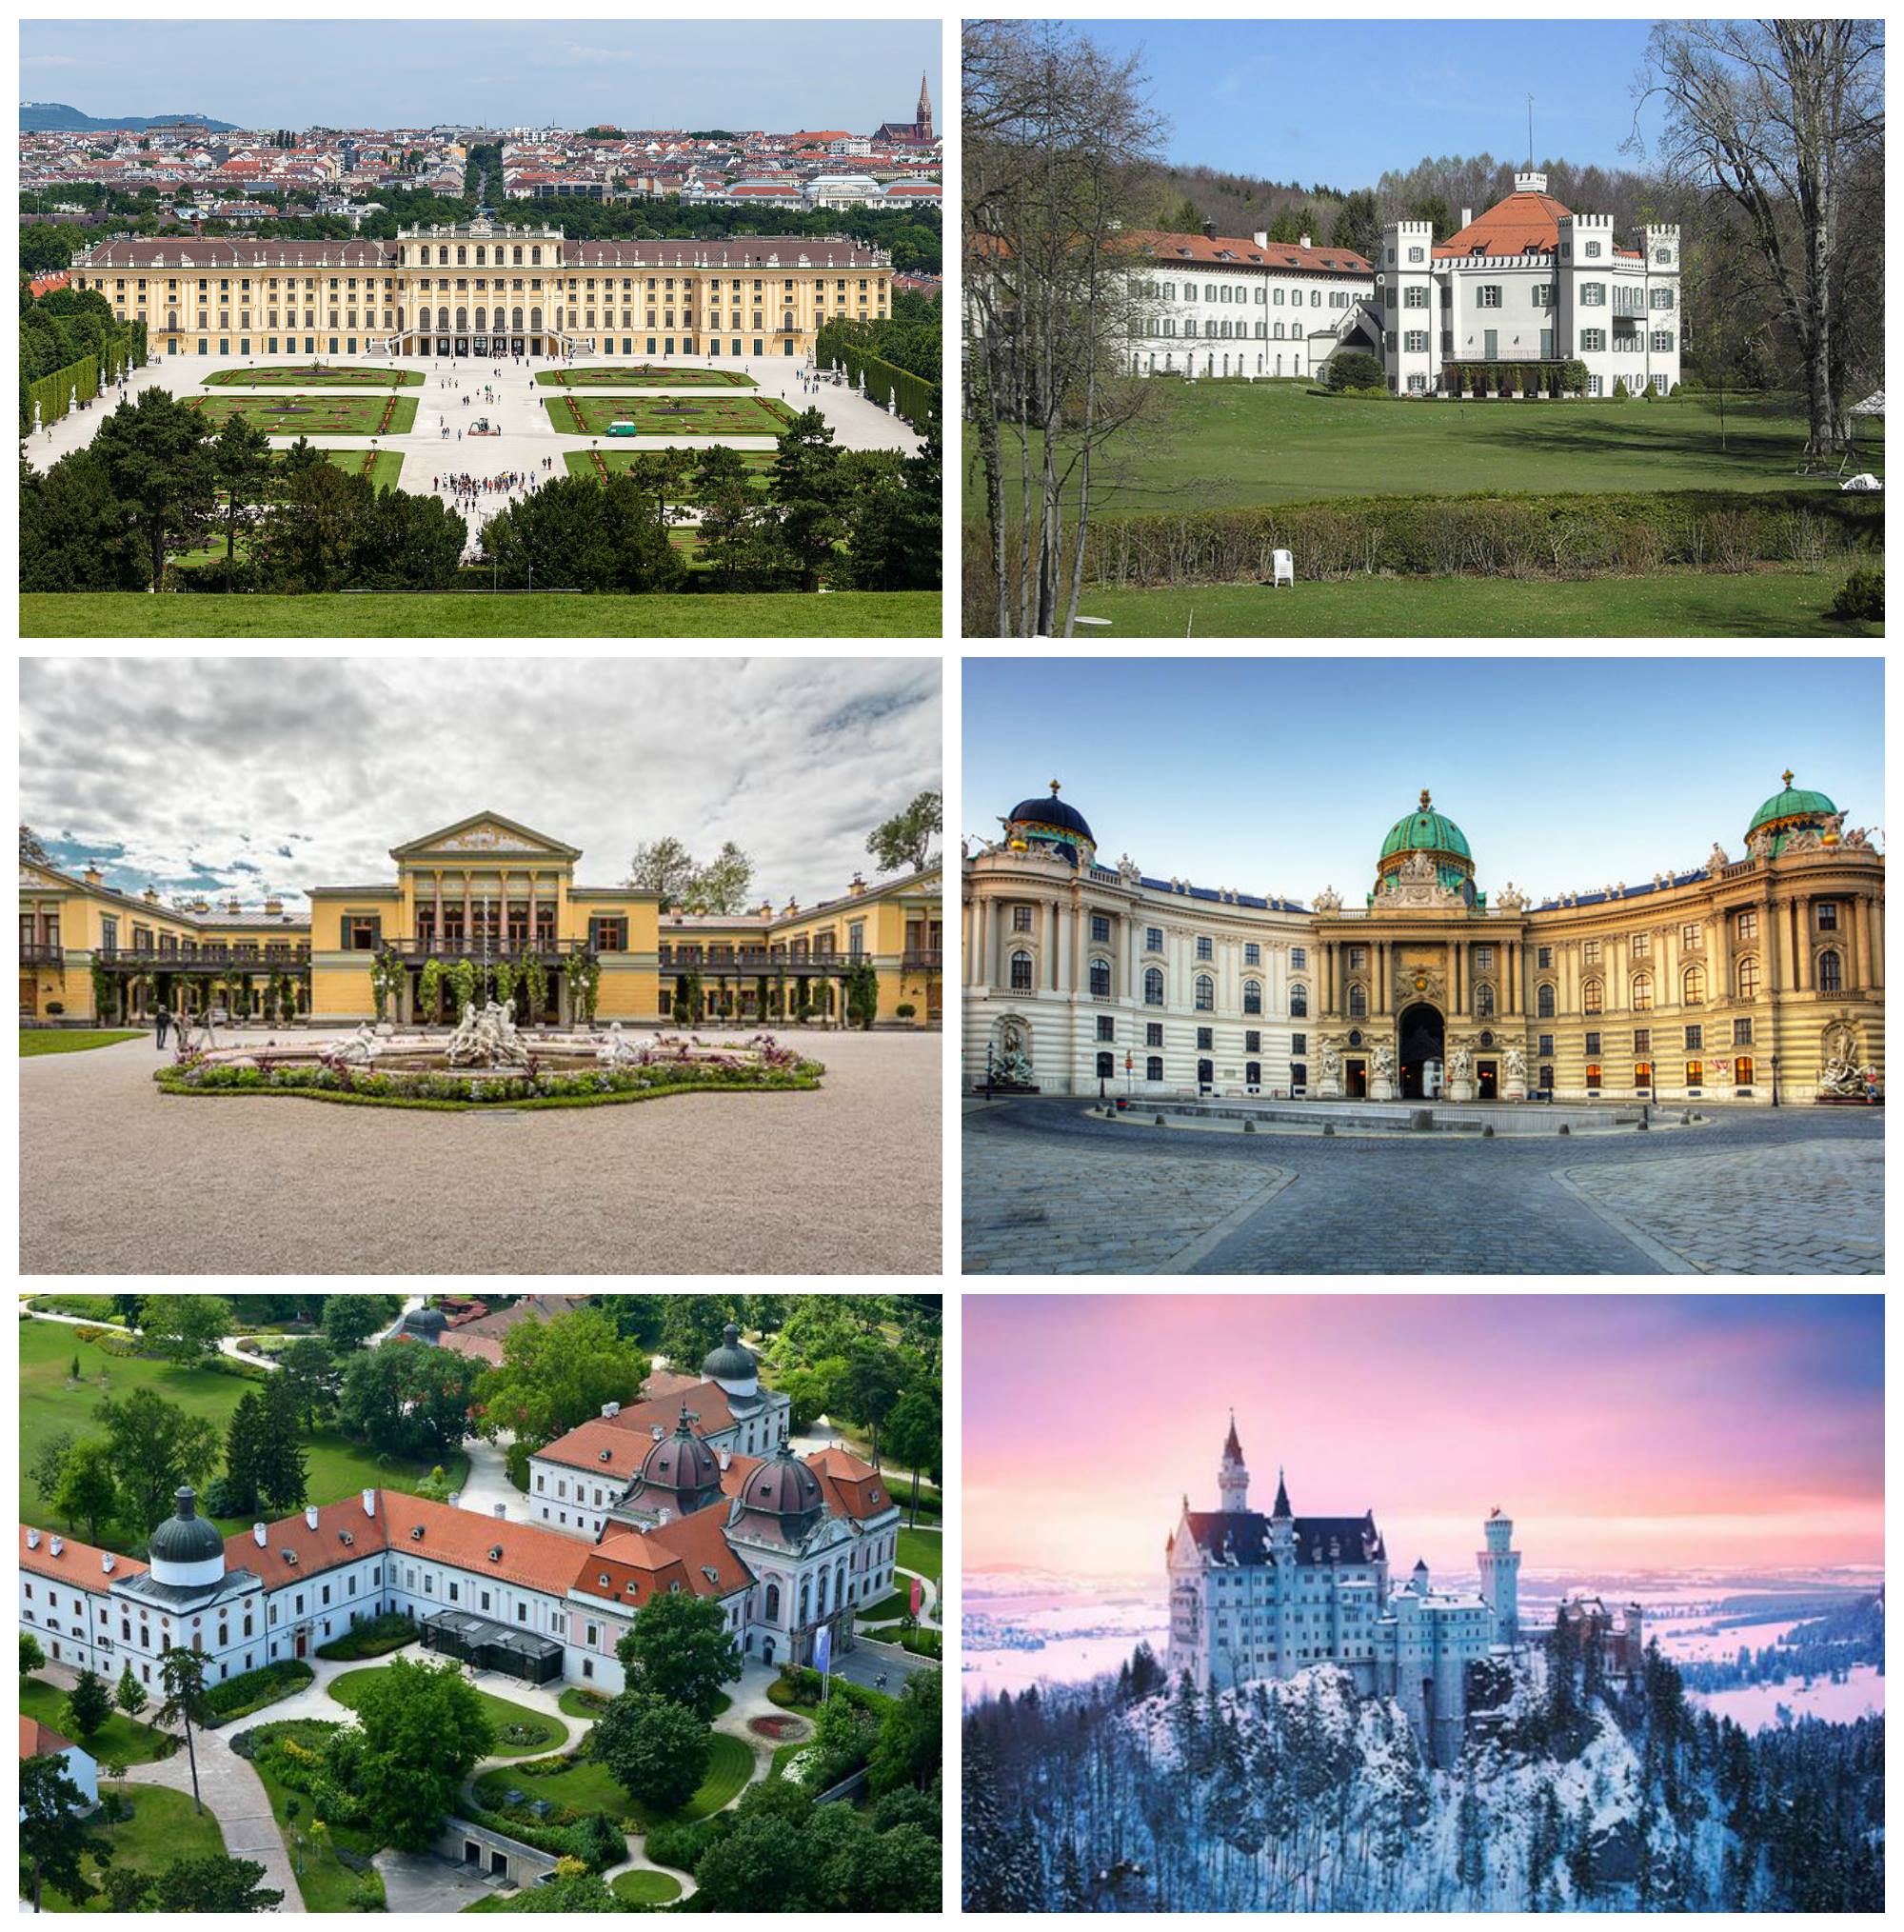 The photo collage shows several castles mentioned in the book The Accidental Empress